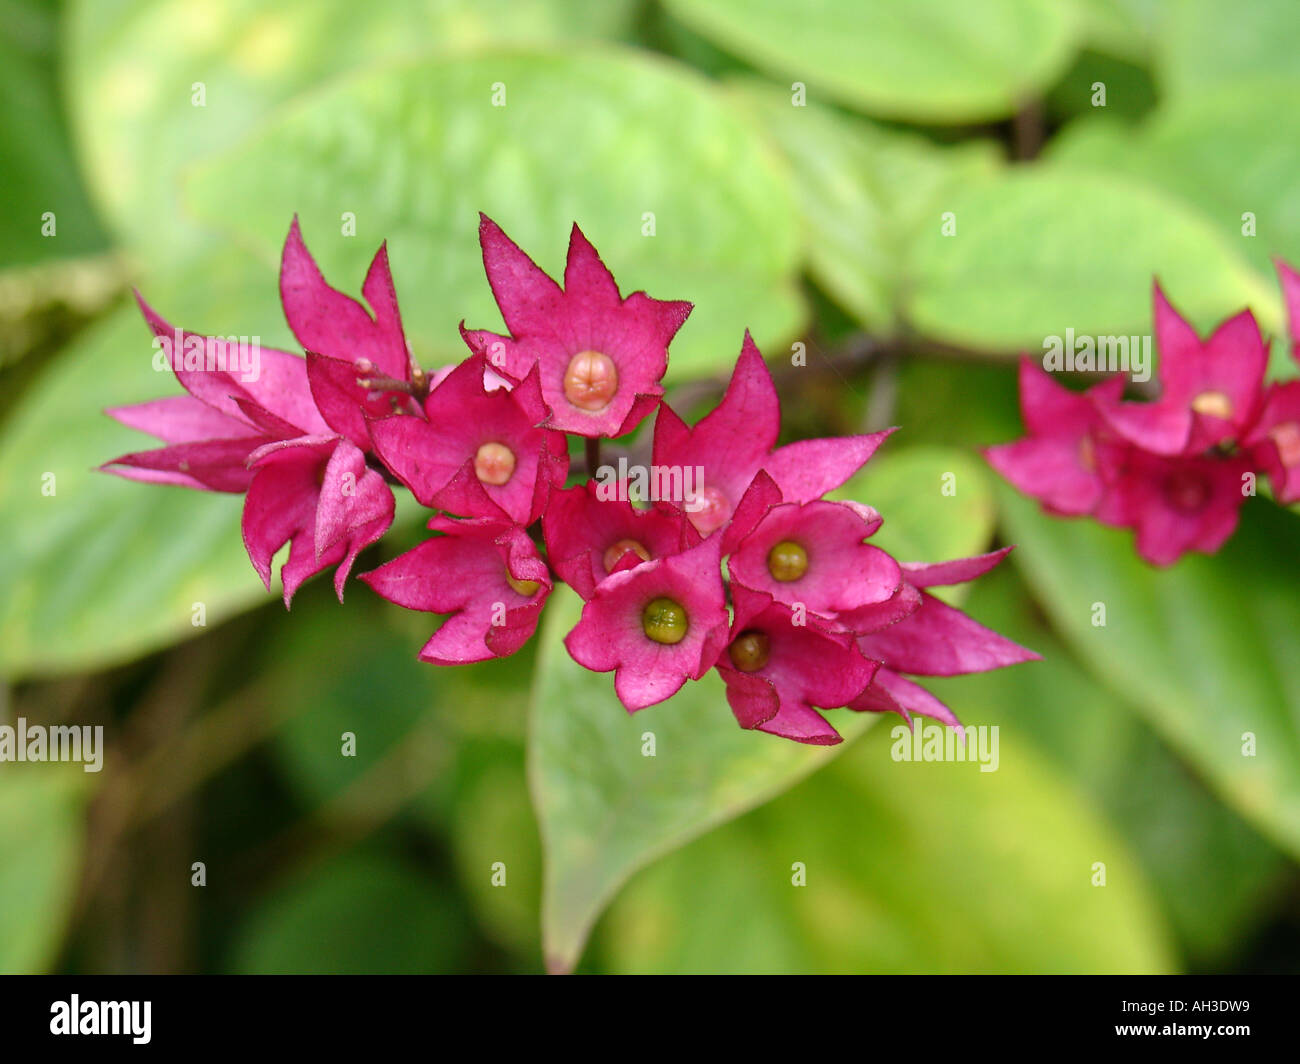 Interesting tropical plant with pink flowers growing in Copperbelt region of Zambia, Southern Africa Stock Photo